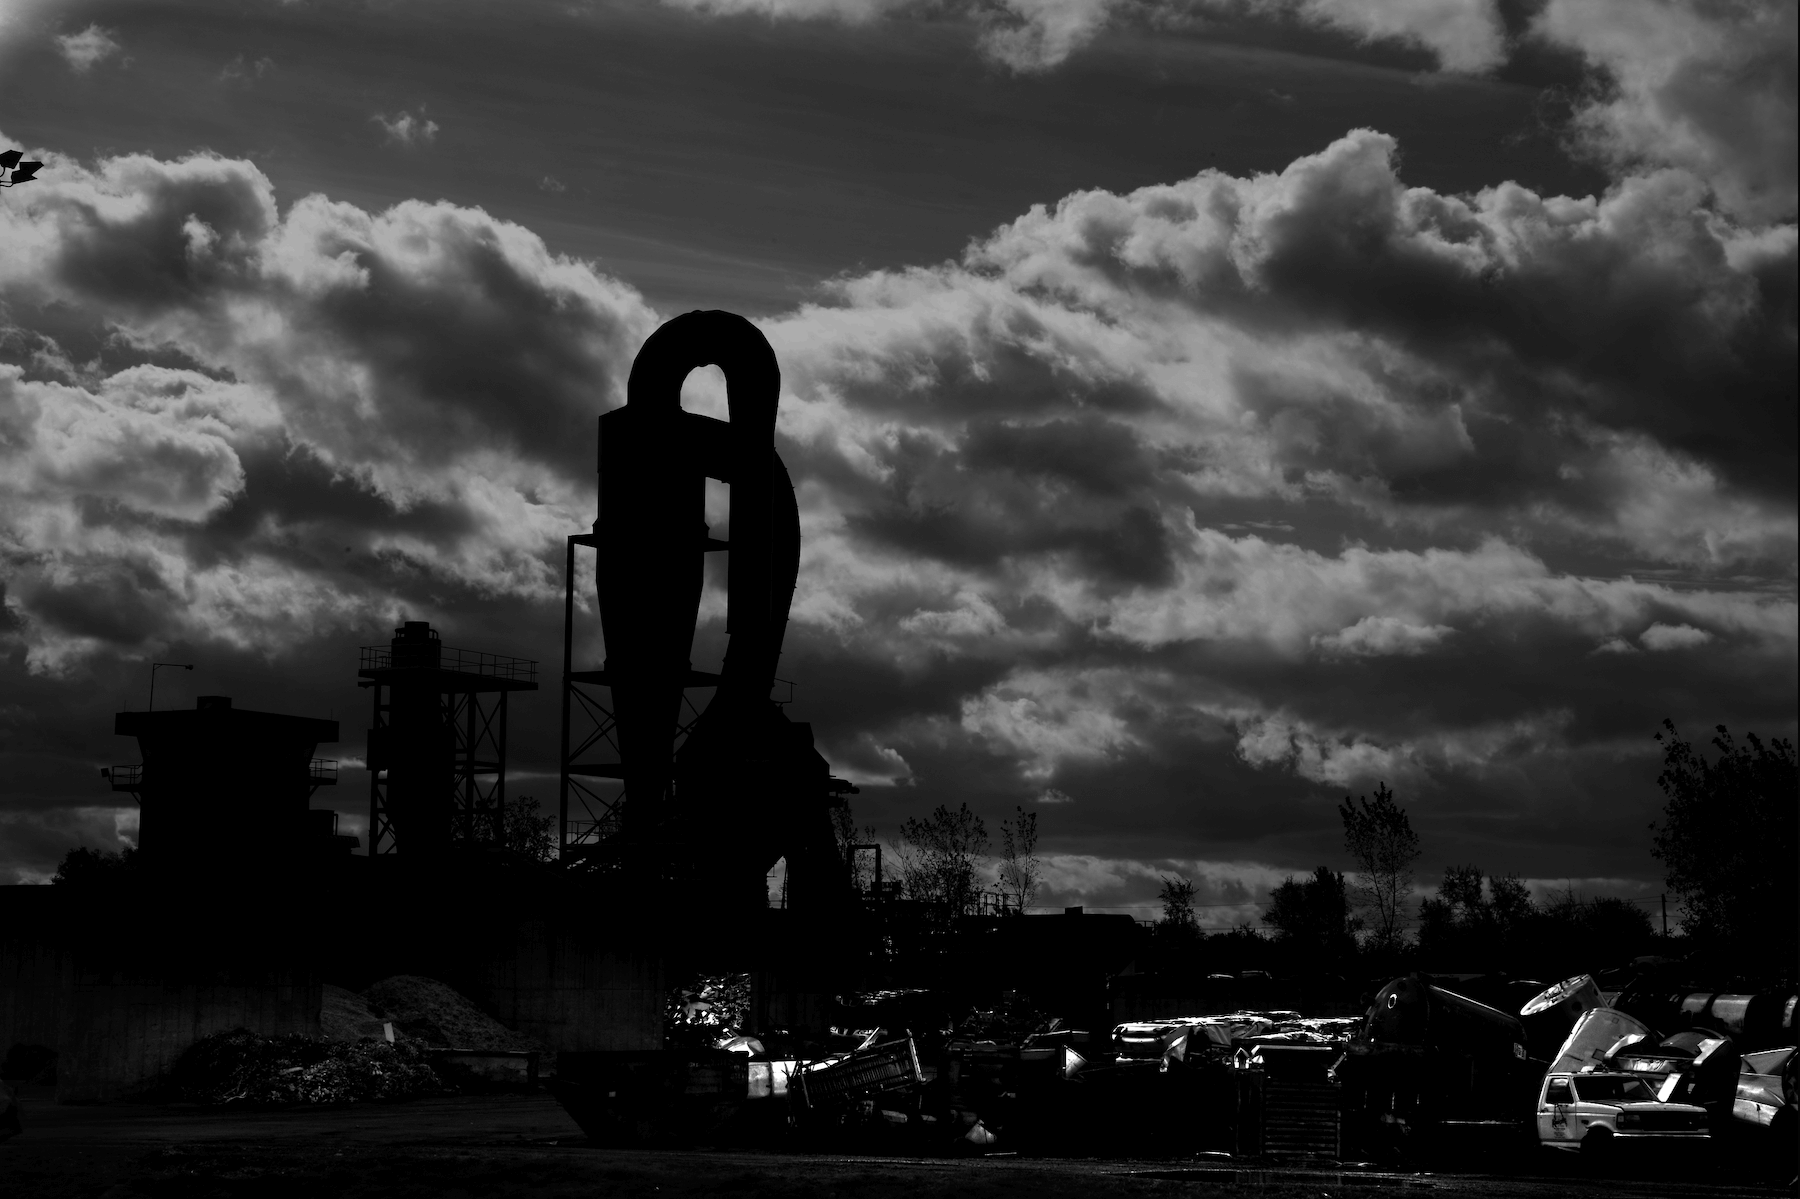 a silhouette of a massive metal re-cycling machine with a pile of dead cars in the foreground